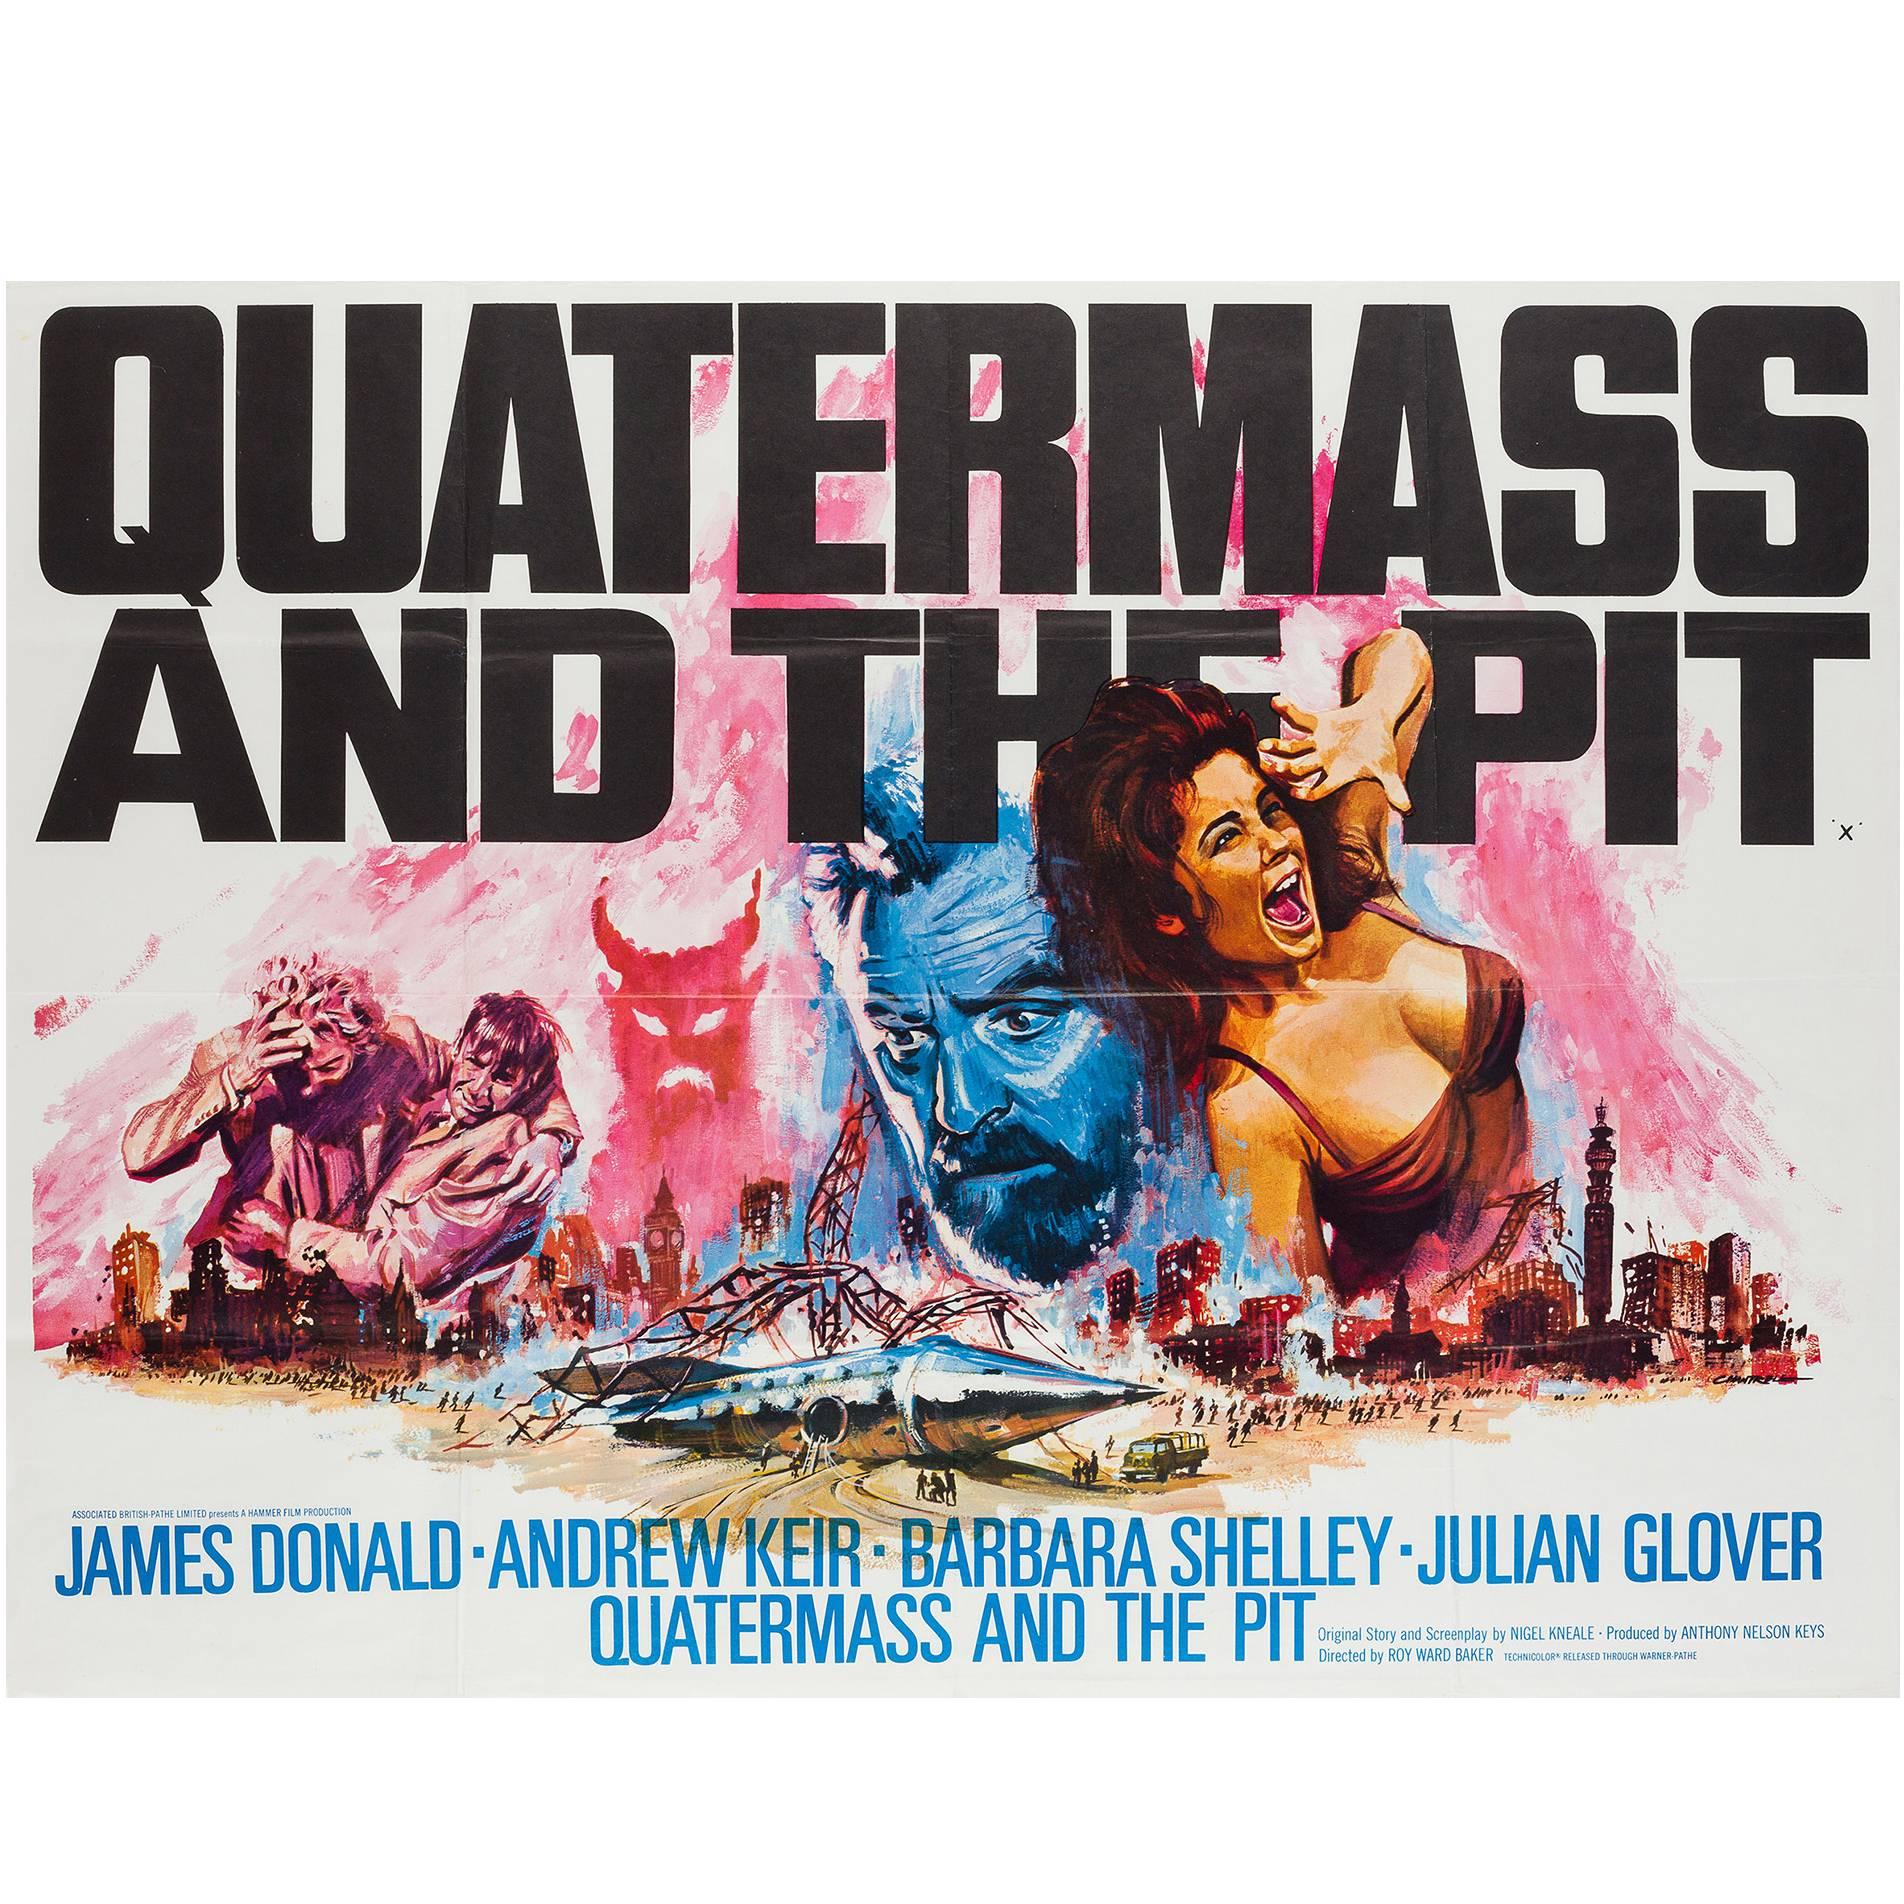 Quatermass and the Pit Original UK Film Poster, Tom Chantrell, 1967